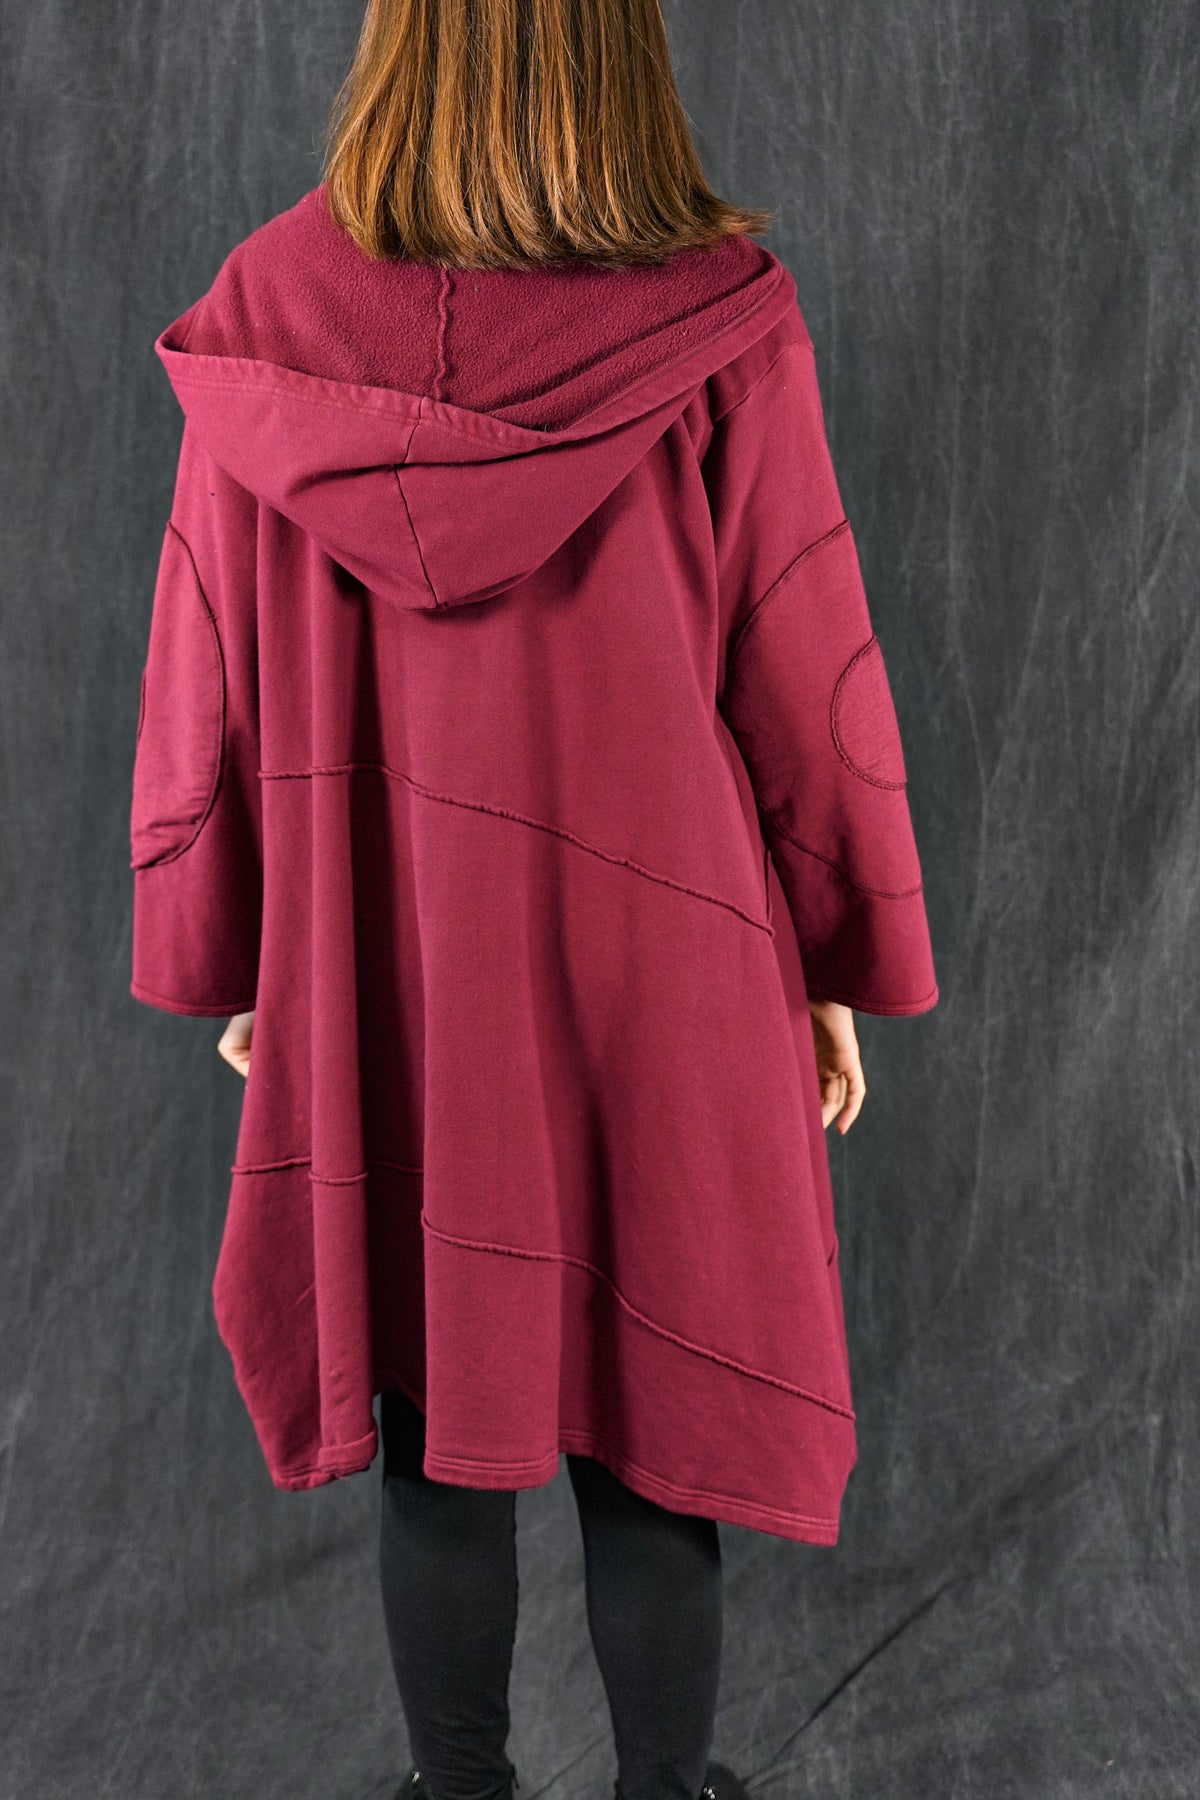 5227 Collectable Blue Fish Fleece Fig Coat ROSSO RED